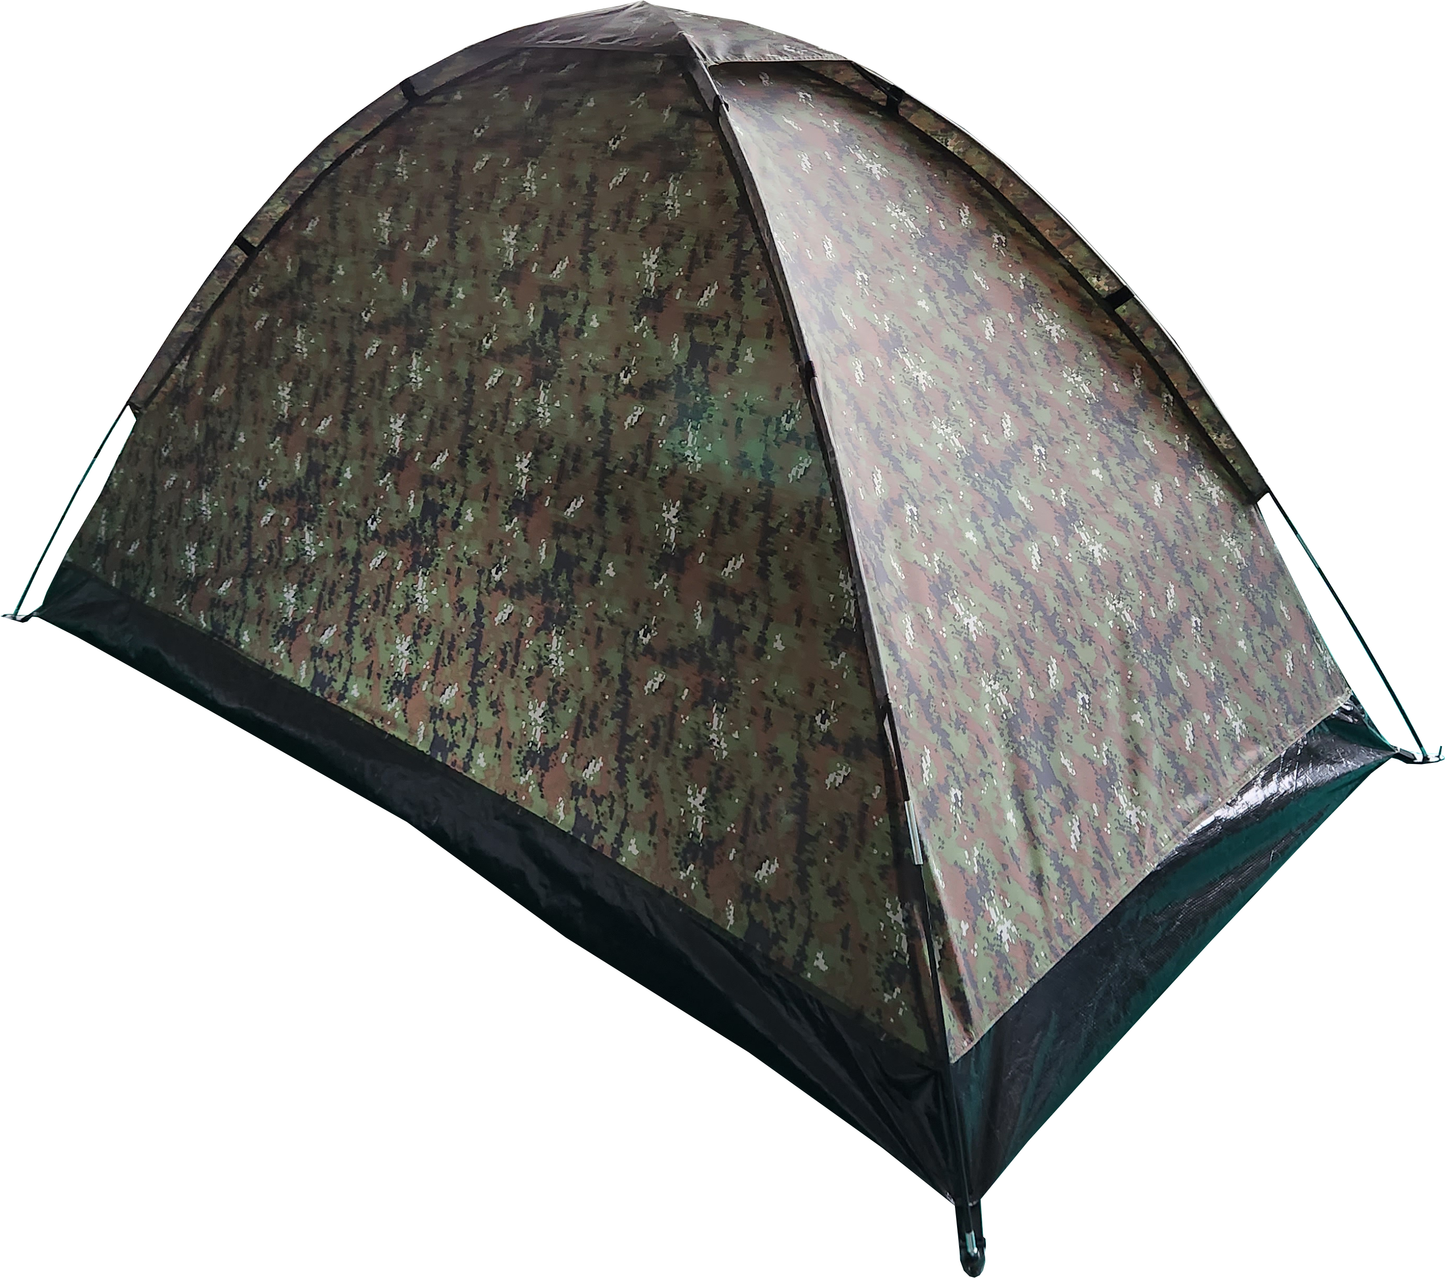 Chotto Outdoor - Gibson Camping Tent - Digital camouflage, autumn colors